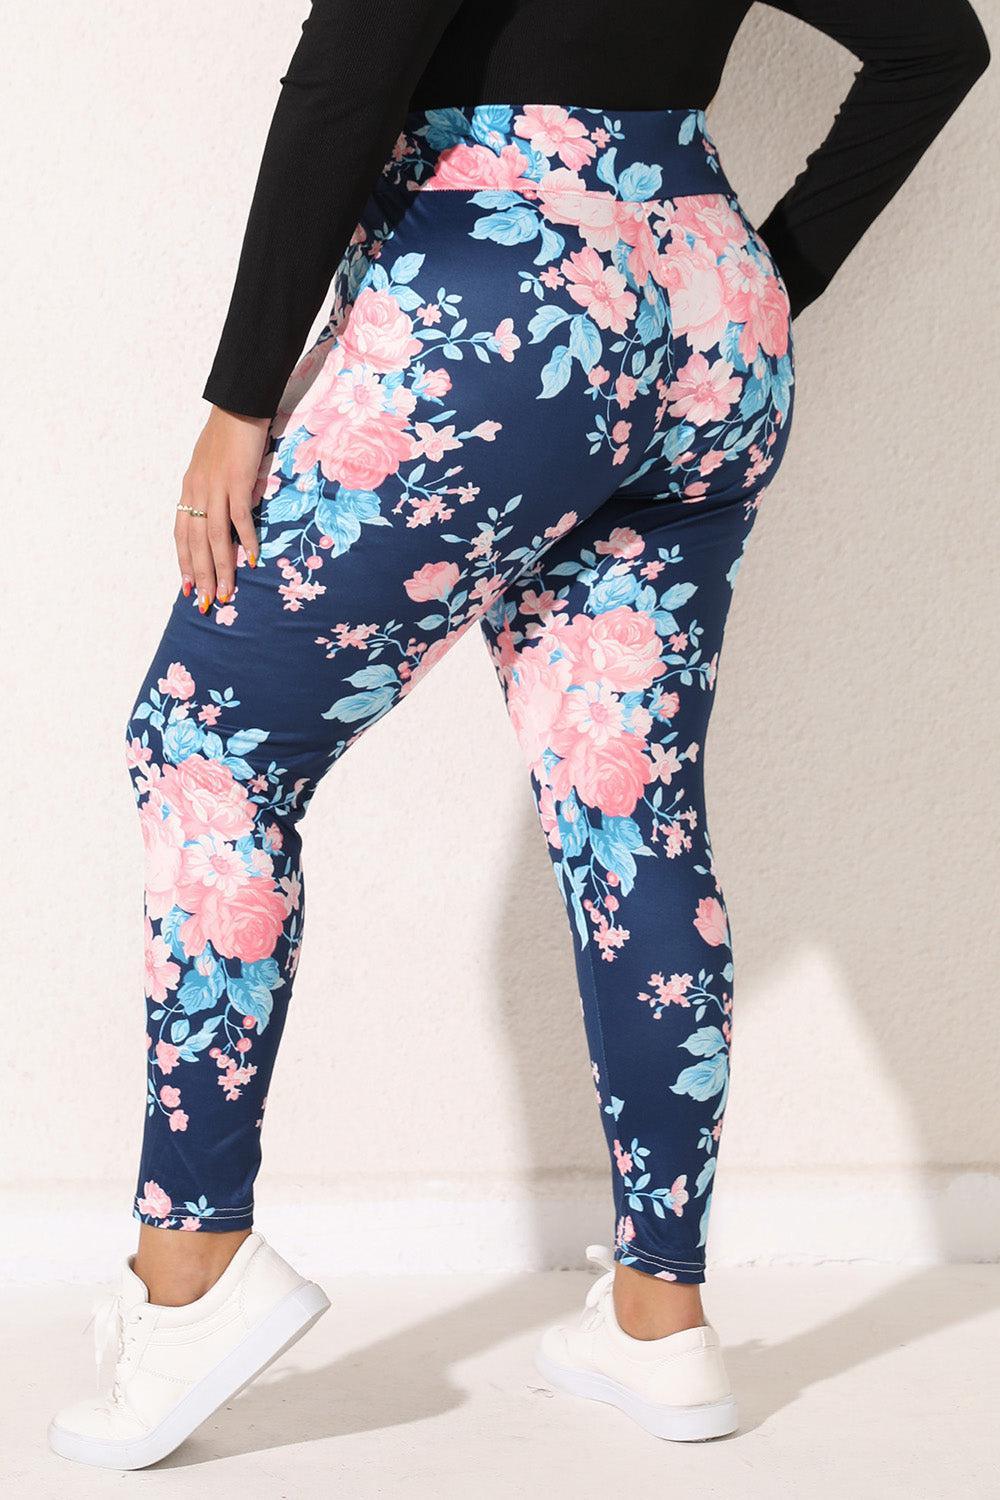 a woman in a black top and floral print leggings